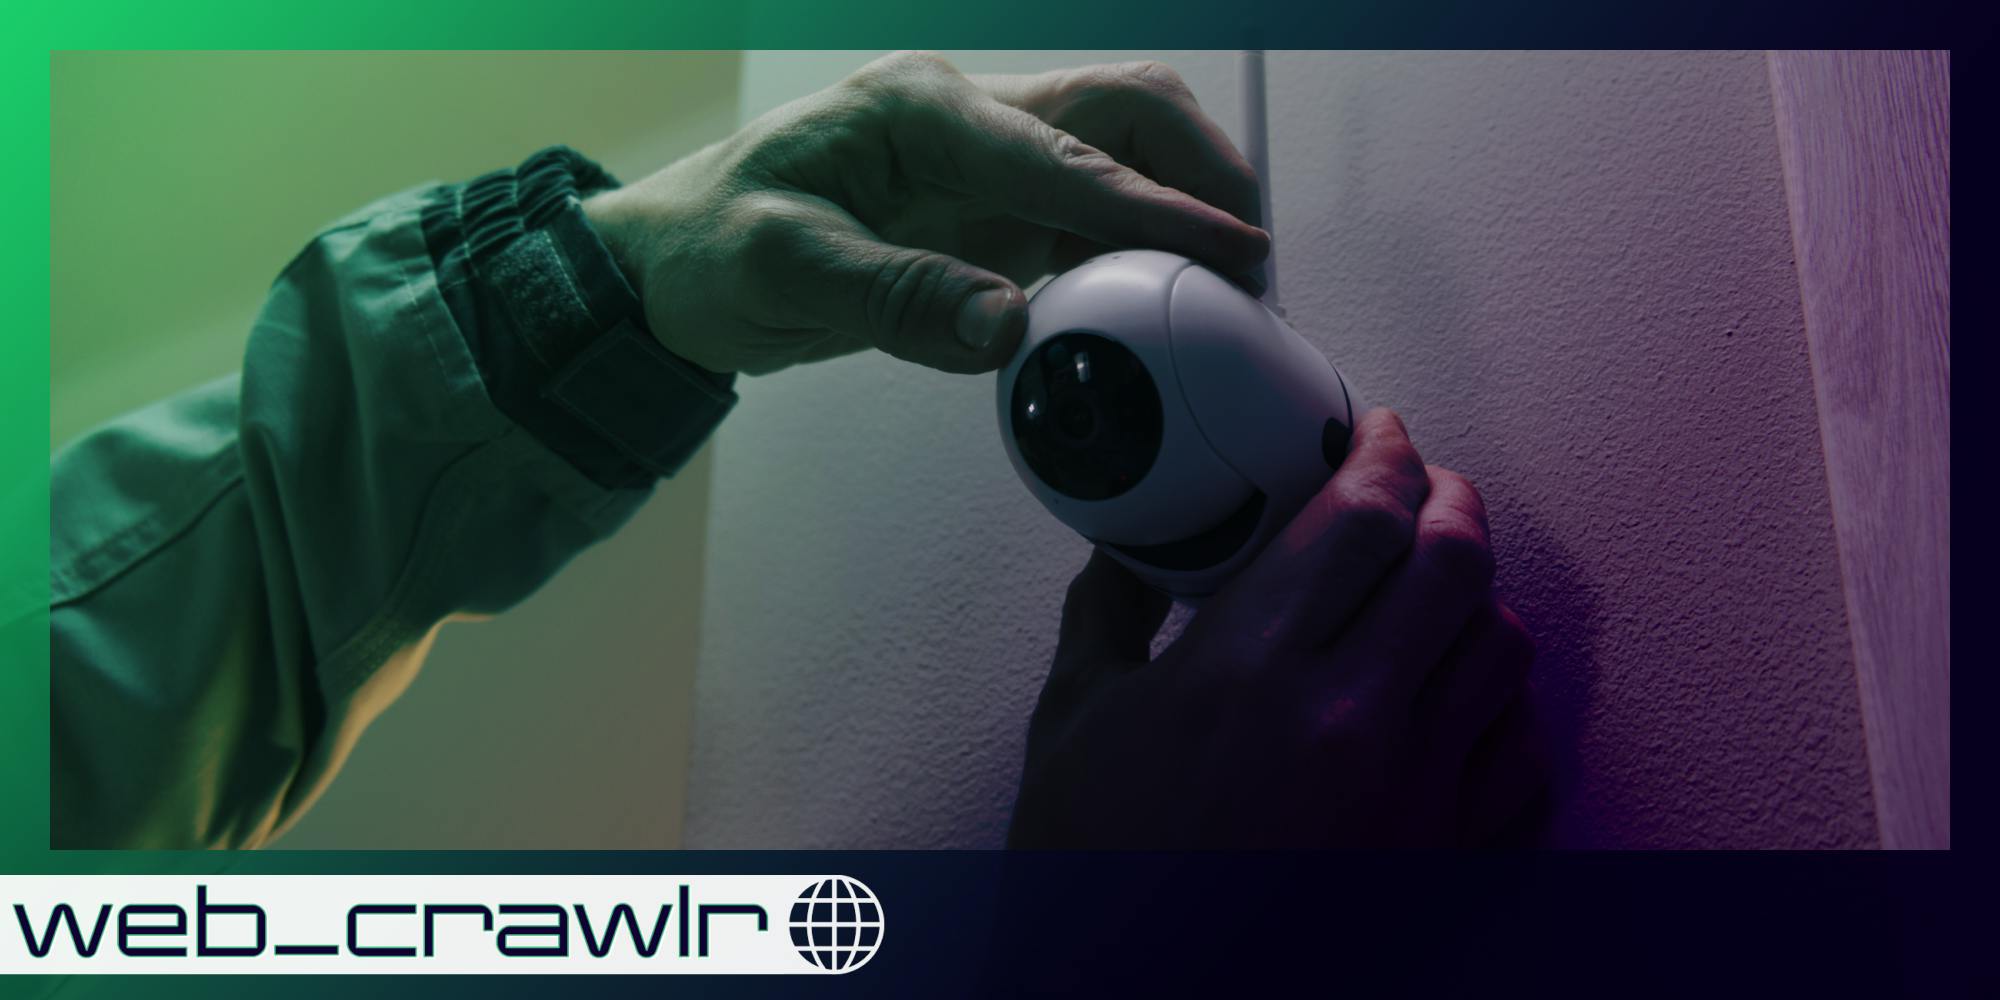 A person installing a video security camera. The Daily Dot newsletter web_crawlr logo is in the bottom left corner.